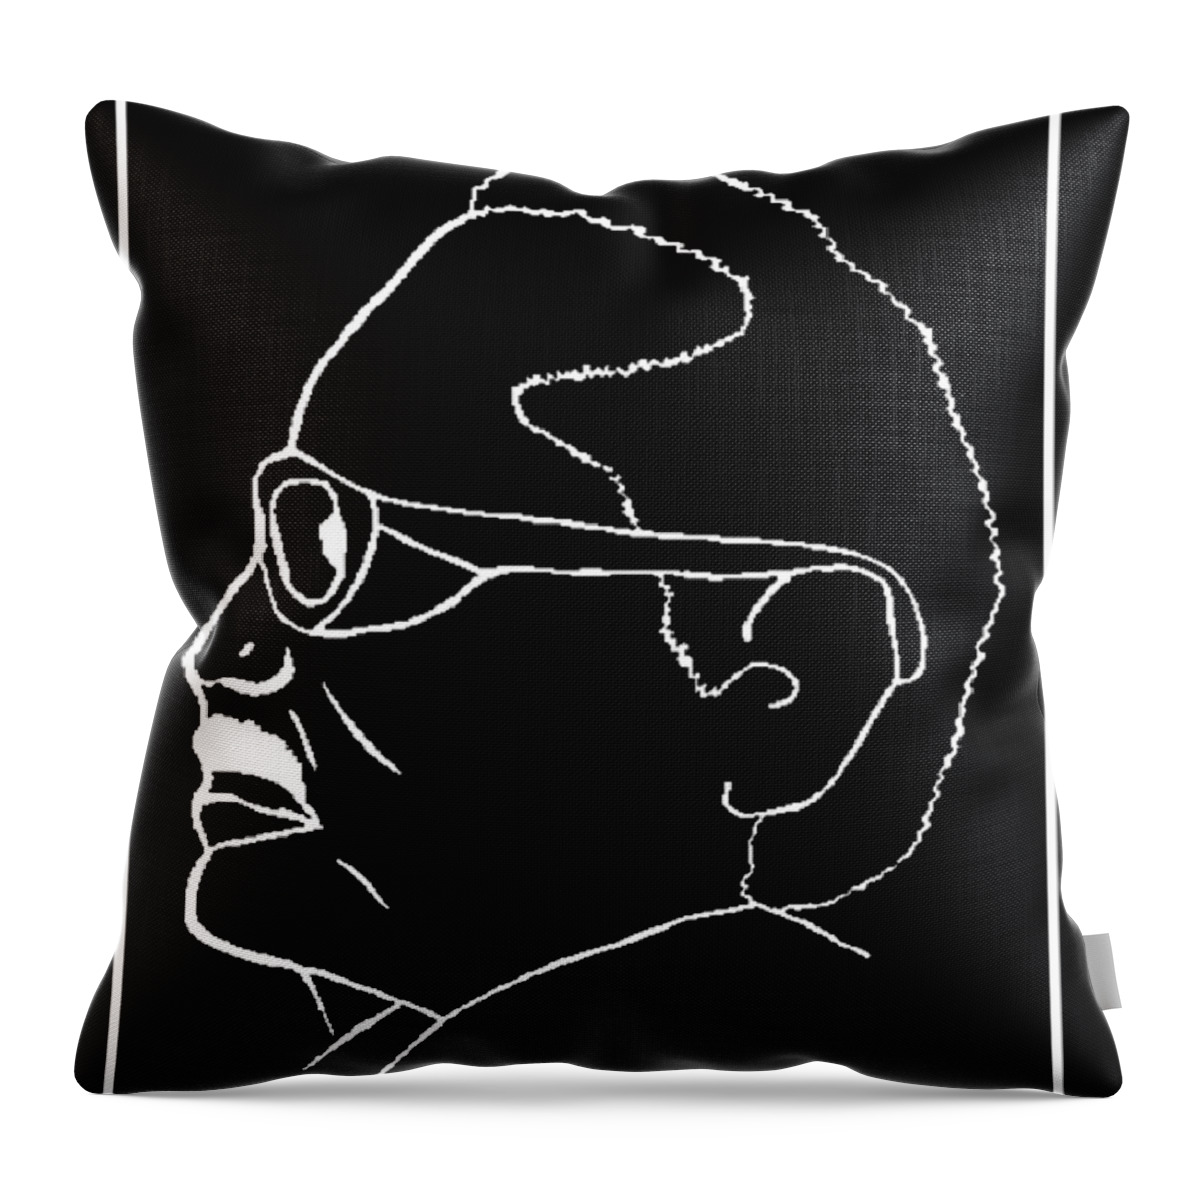 Ango Throw Pillow featuring the painting Agostinho Neto #2 by Antonia Pascoal